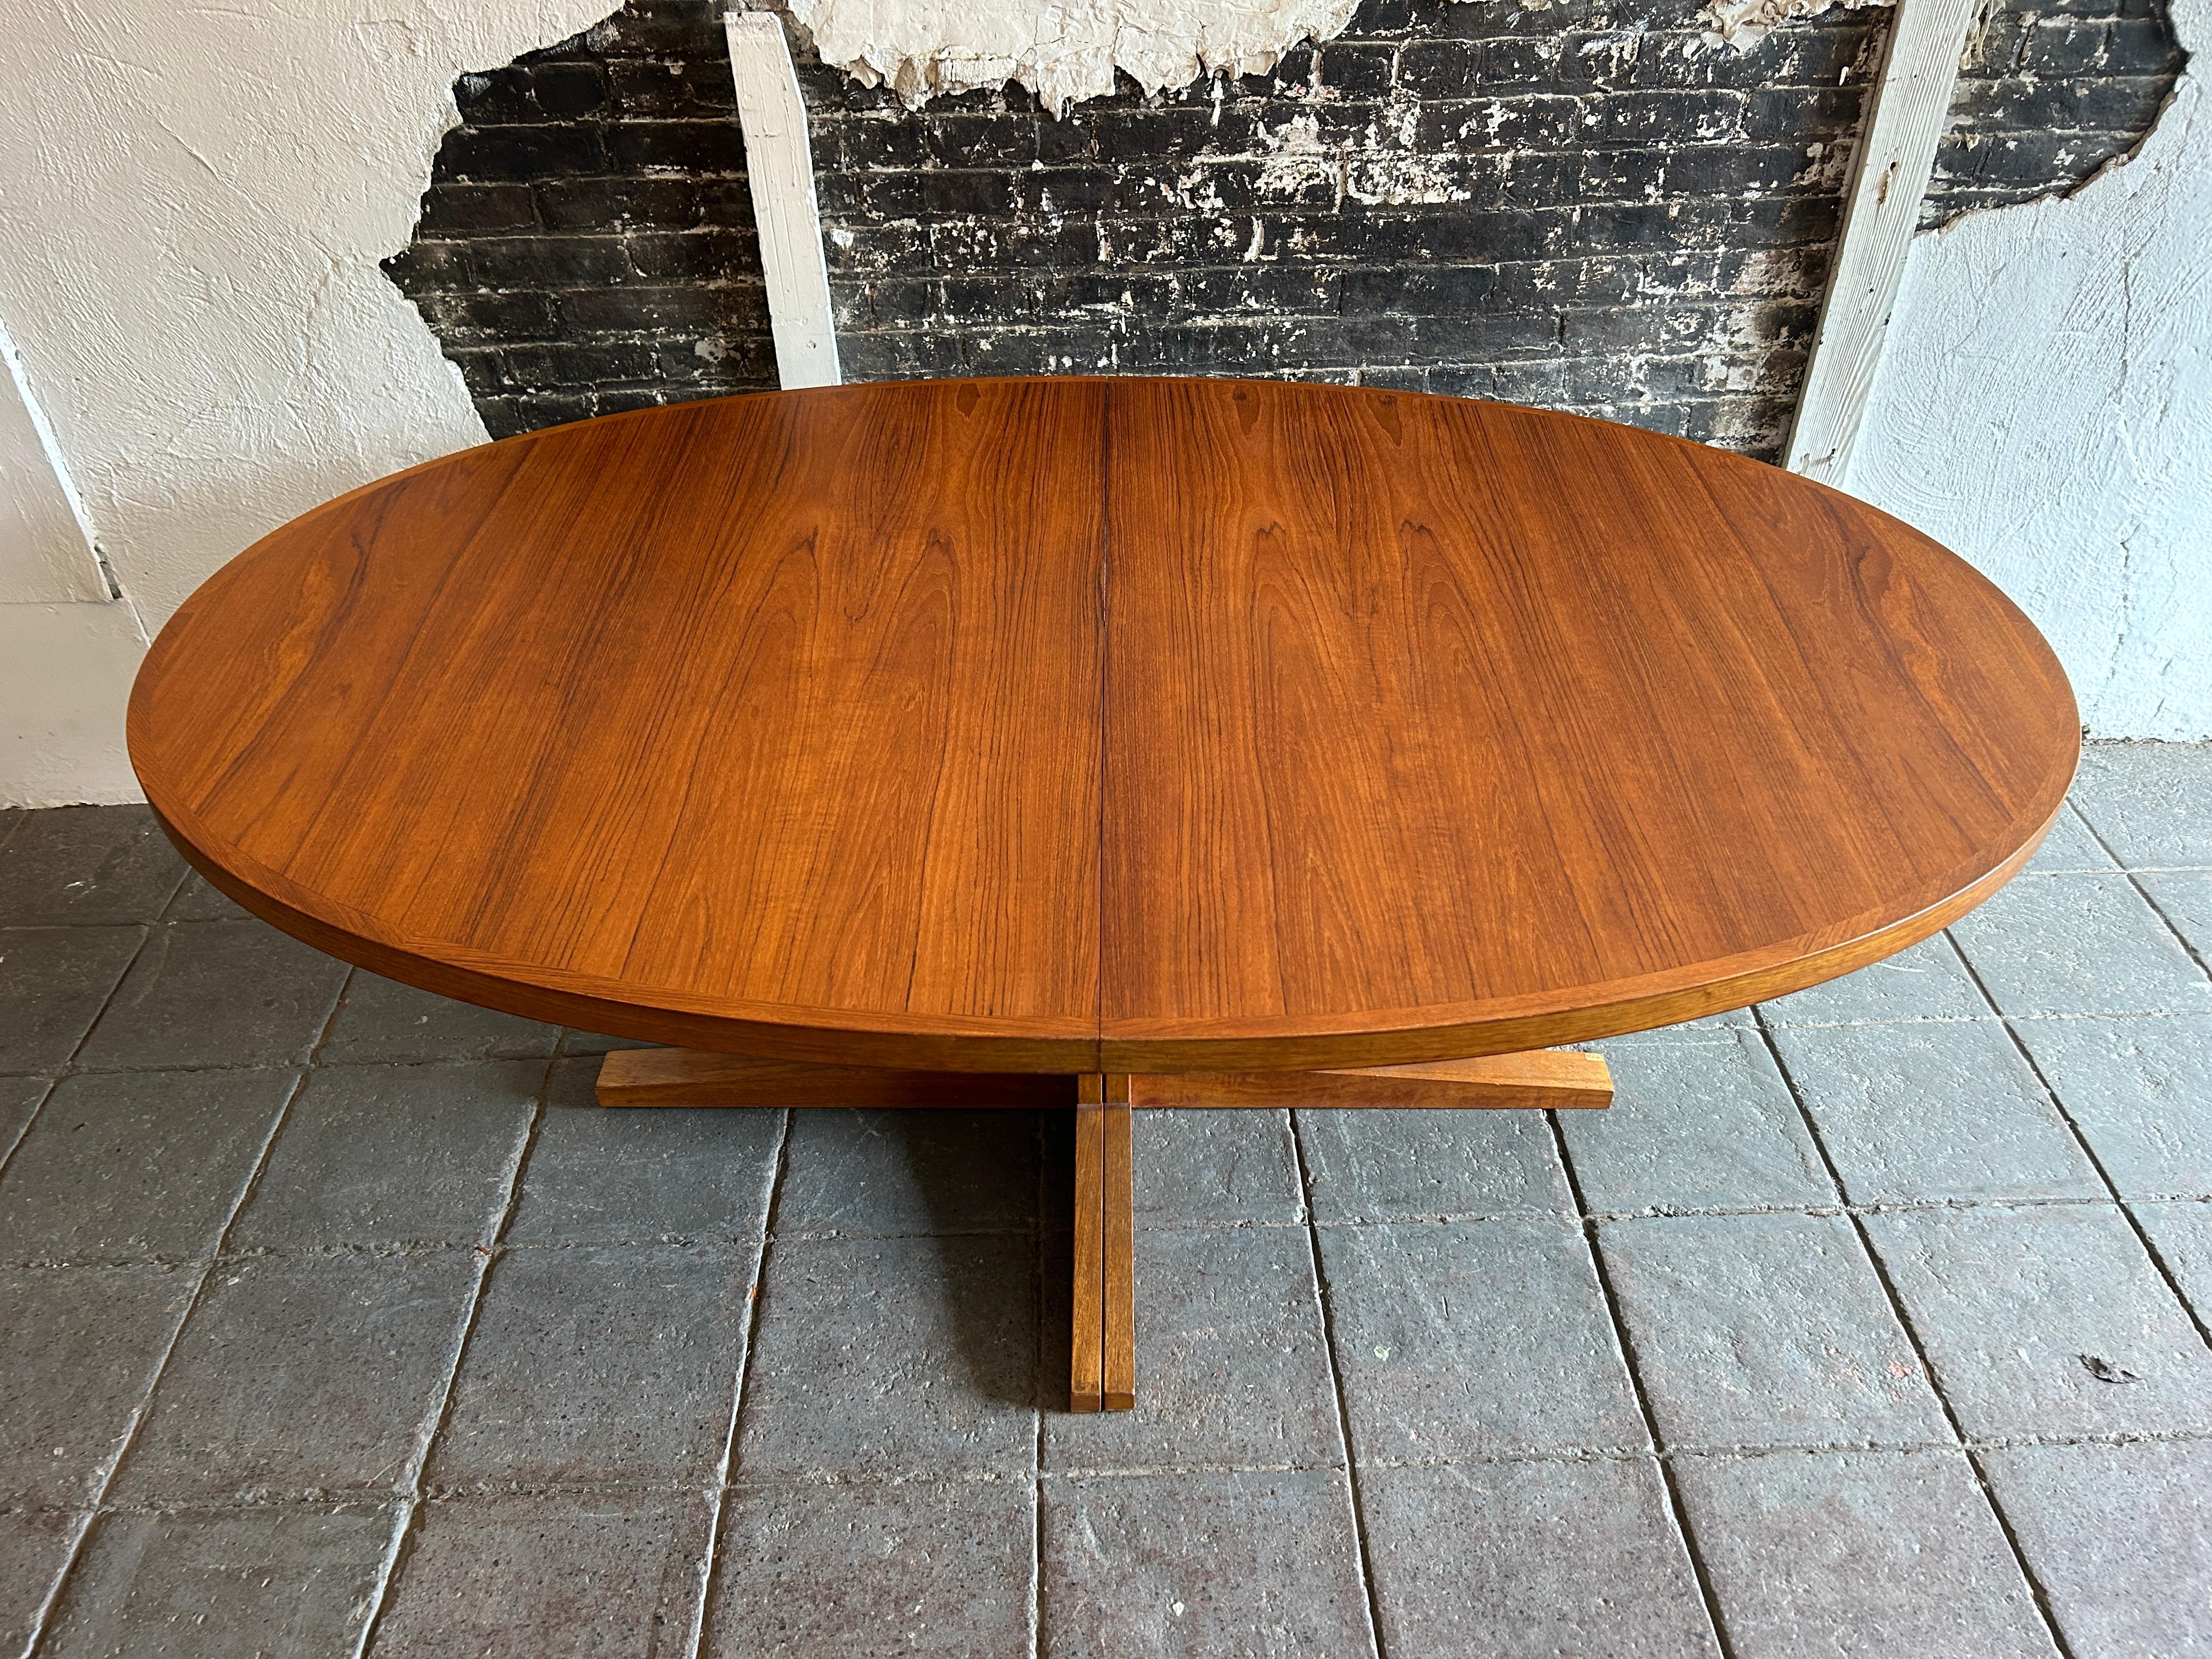 Stunning mid century Teak oval Danish Modern extension dining table with (2) leaves. By John Mortensen for Heltborg Møbler. This table is in beautiful condition with brown teak tones very great modern Dining Table. high quality construction and both